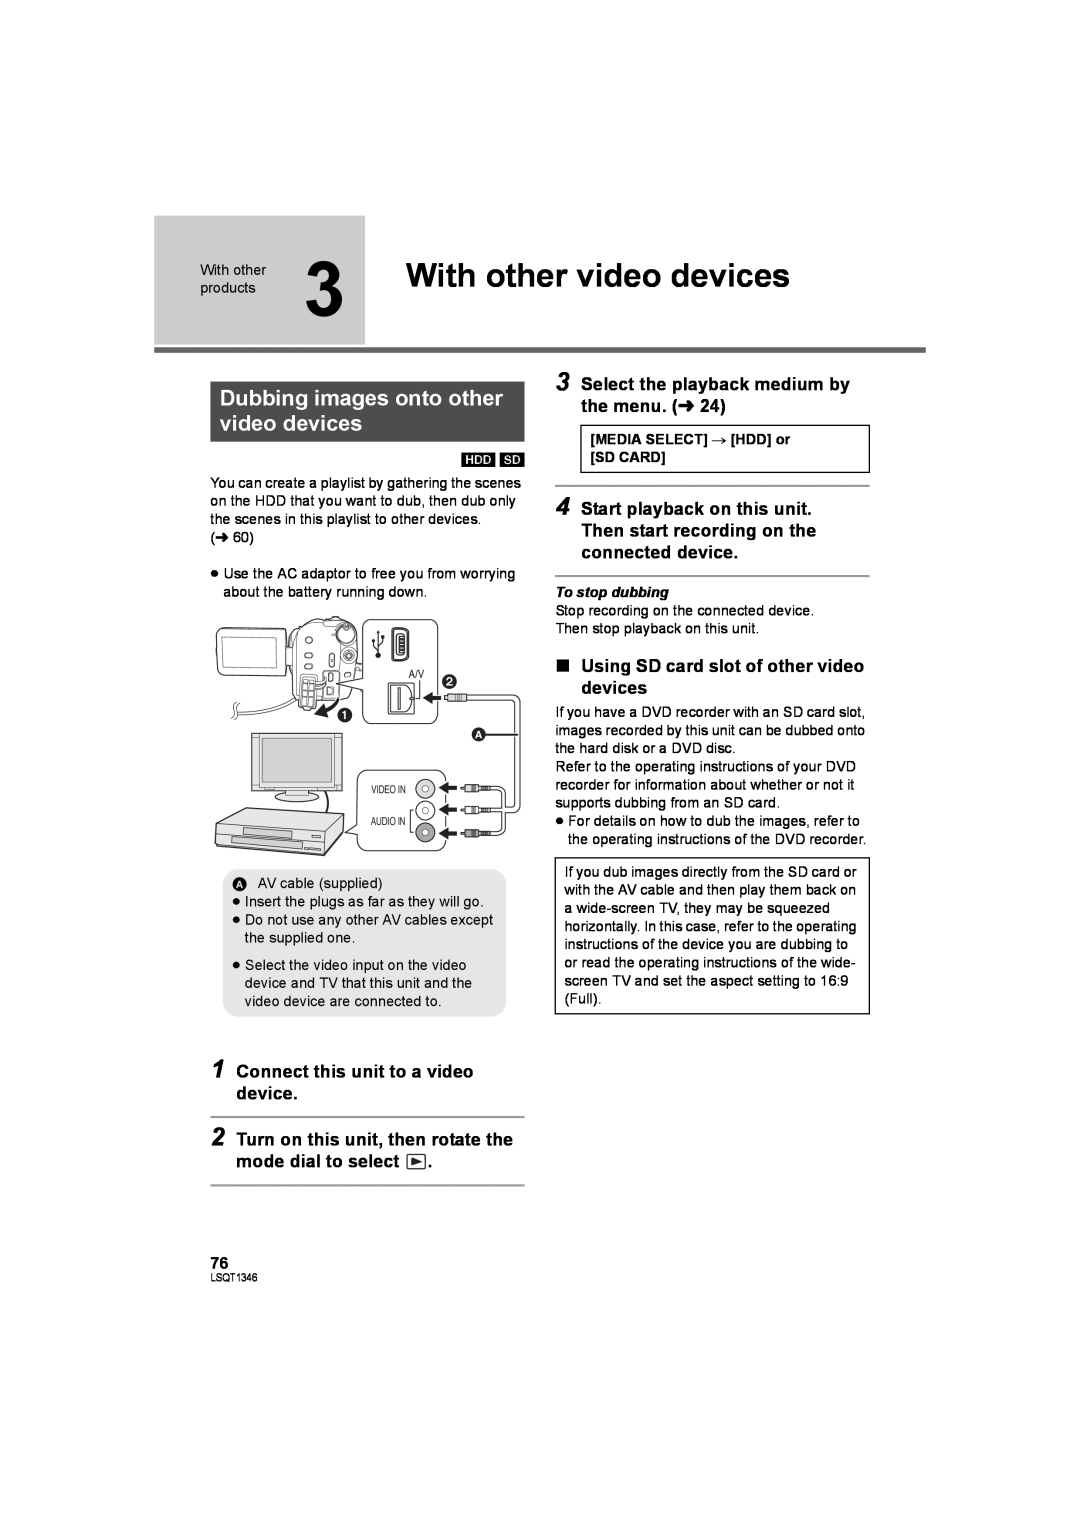 Panasonic SDR-H50 With other video devices, Dubbing images onto other video devices, Connect this unit to a video device 